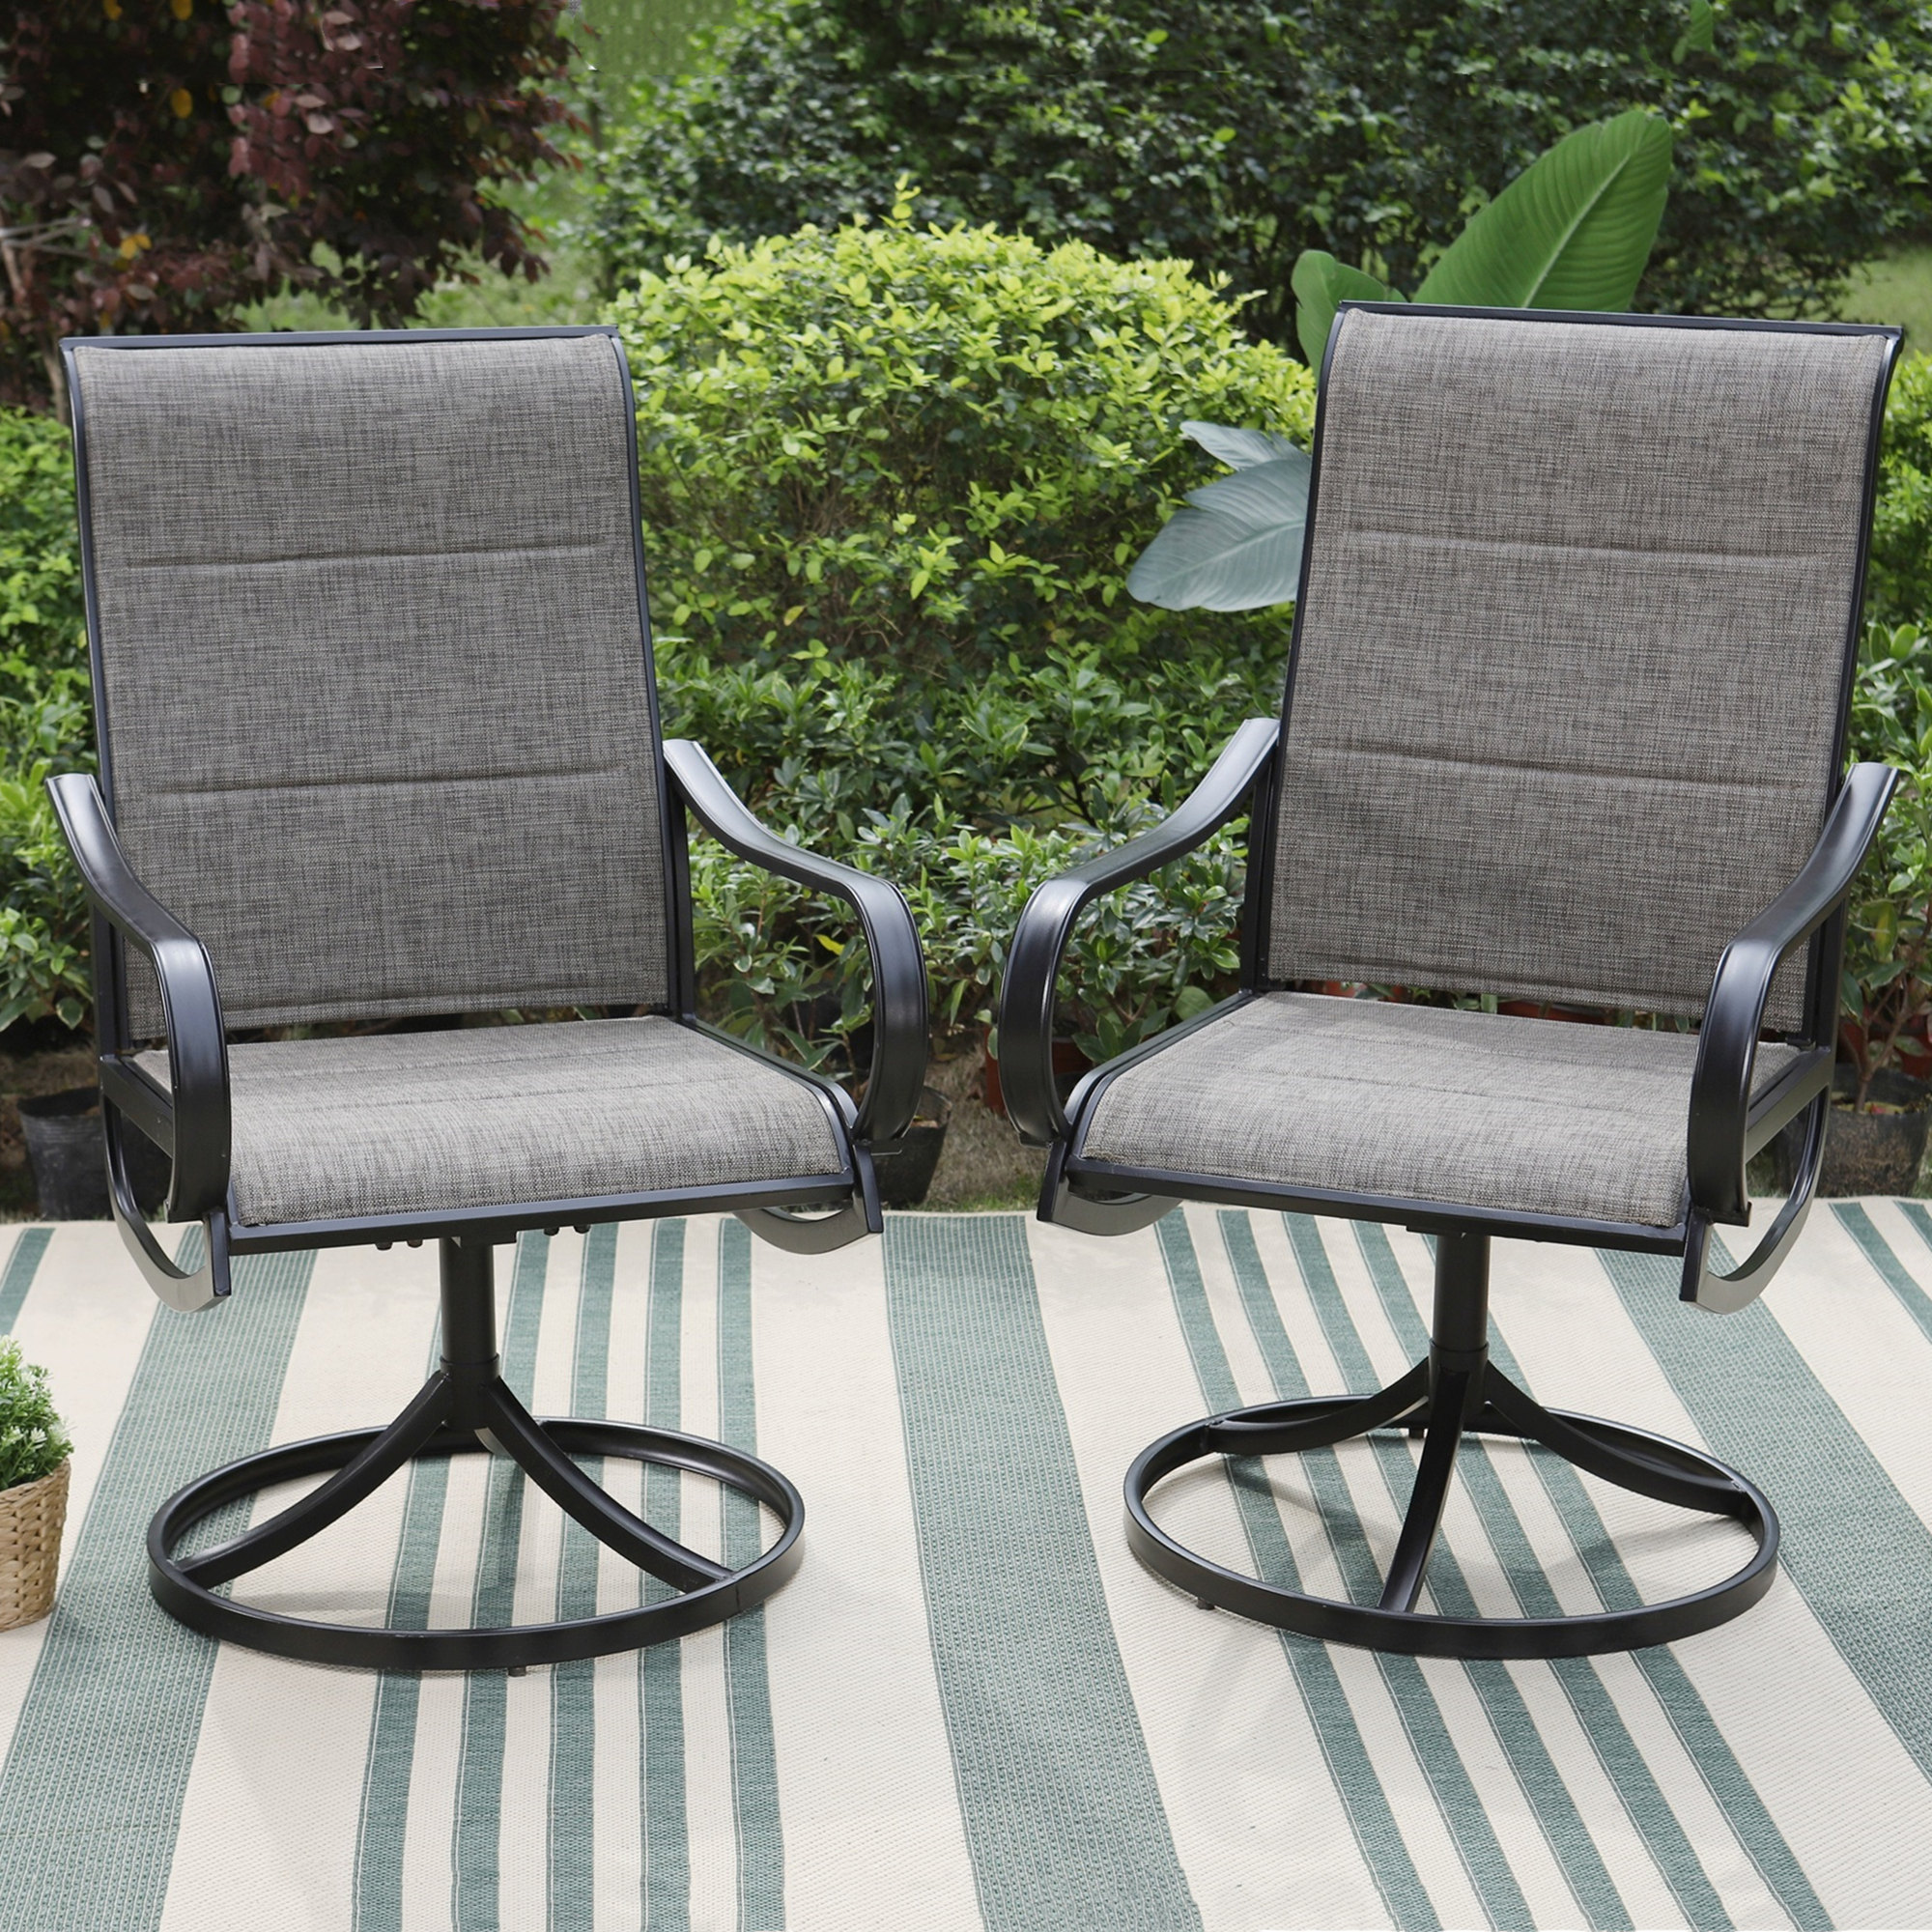 MF Studio Set of 2 High-Back Swivel Outdoor Dining Chairs with Padded Textilene Seat, Black & Dark Brown - image 1 of 11